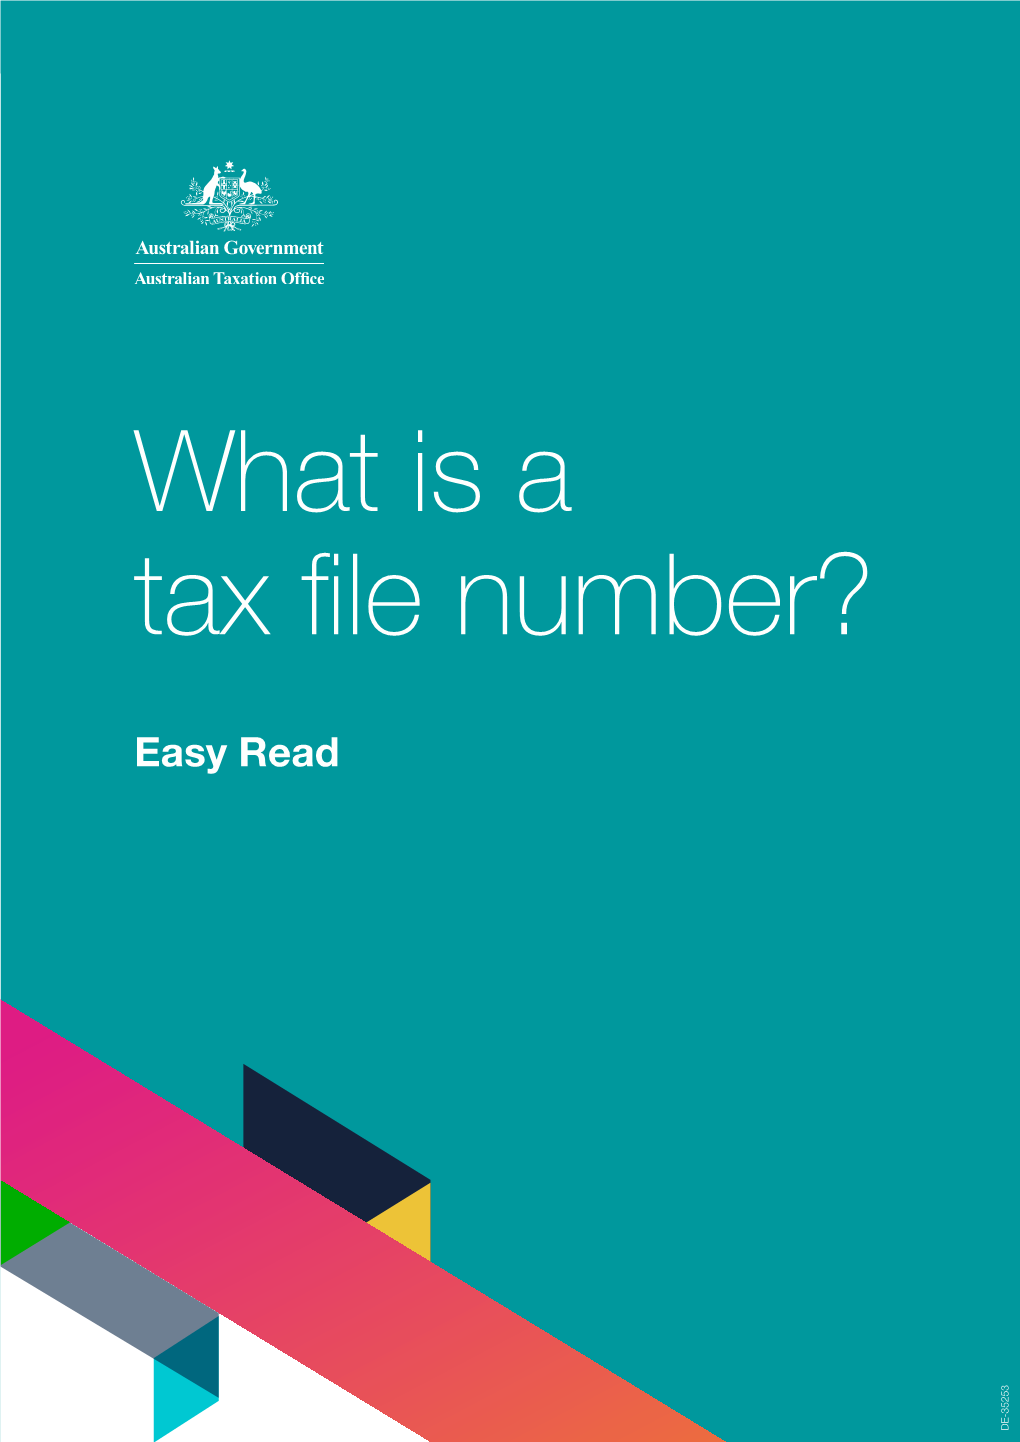 What Is a Tax File Number?